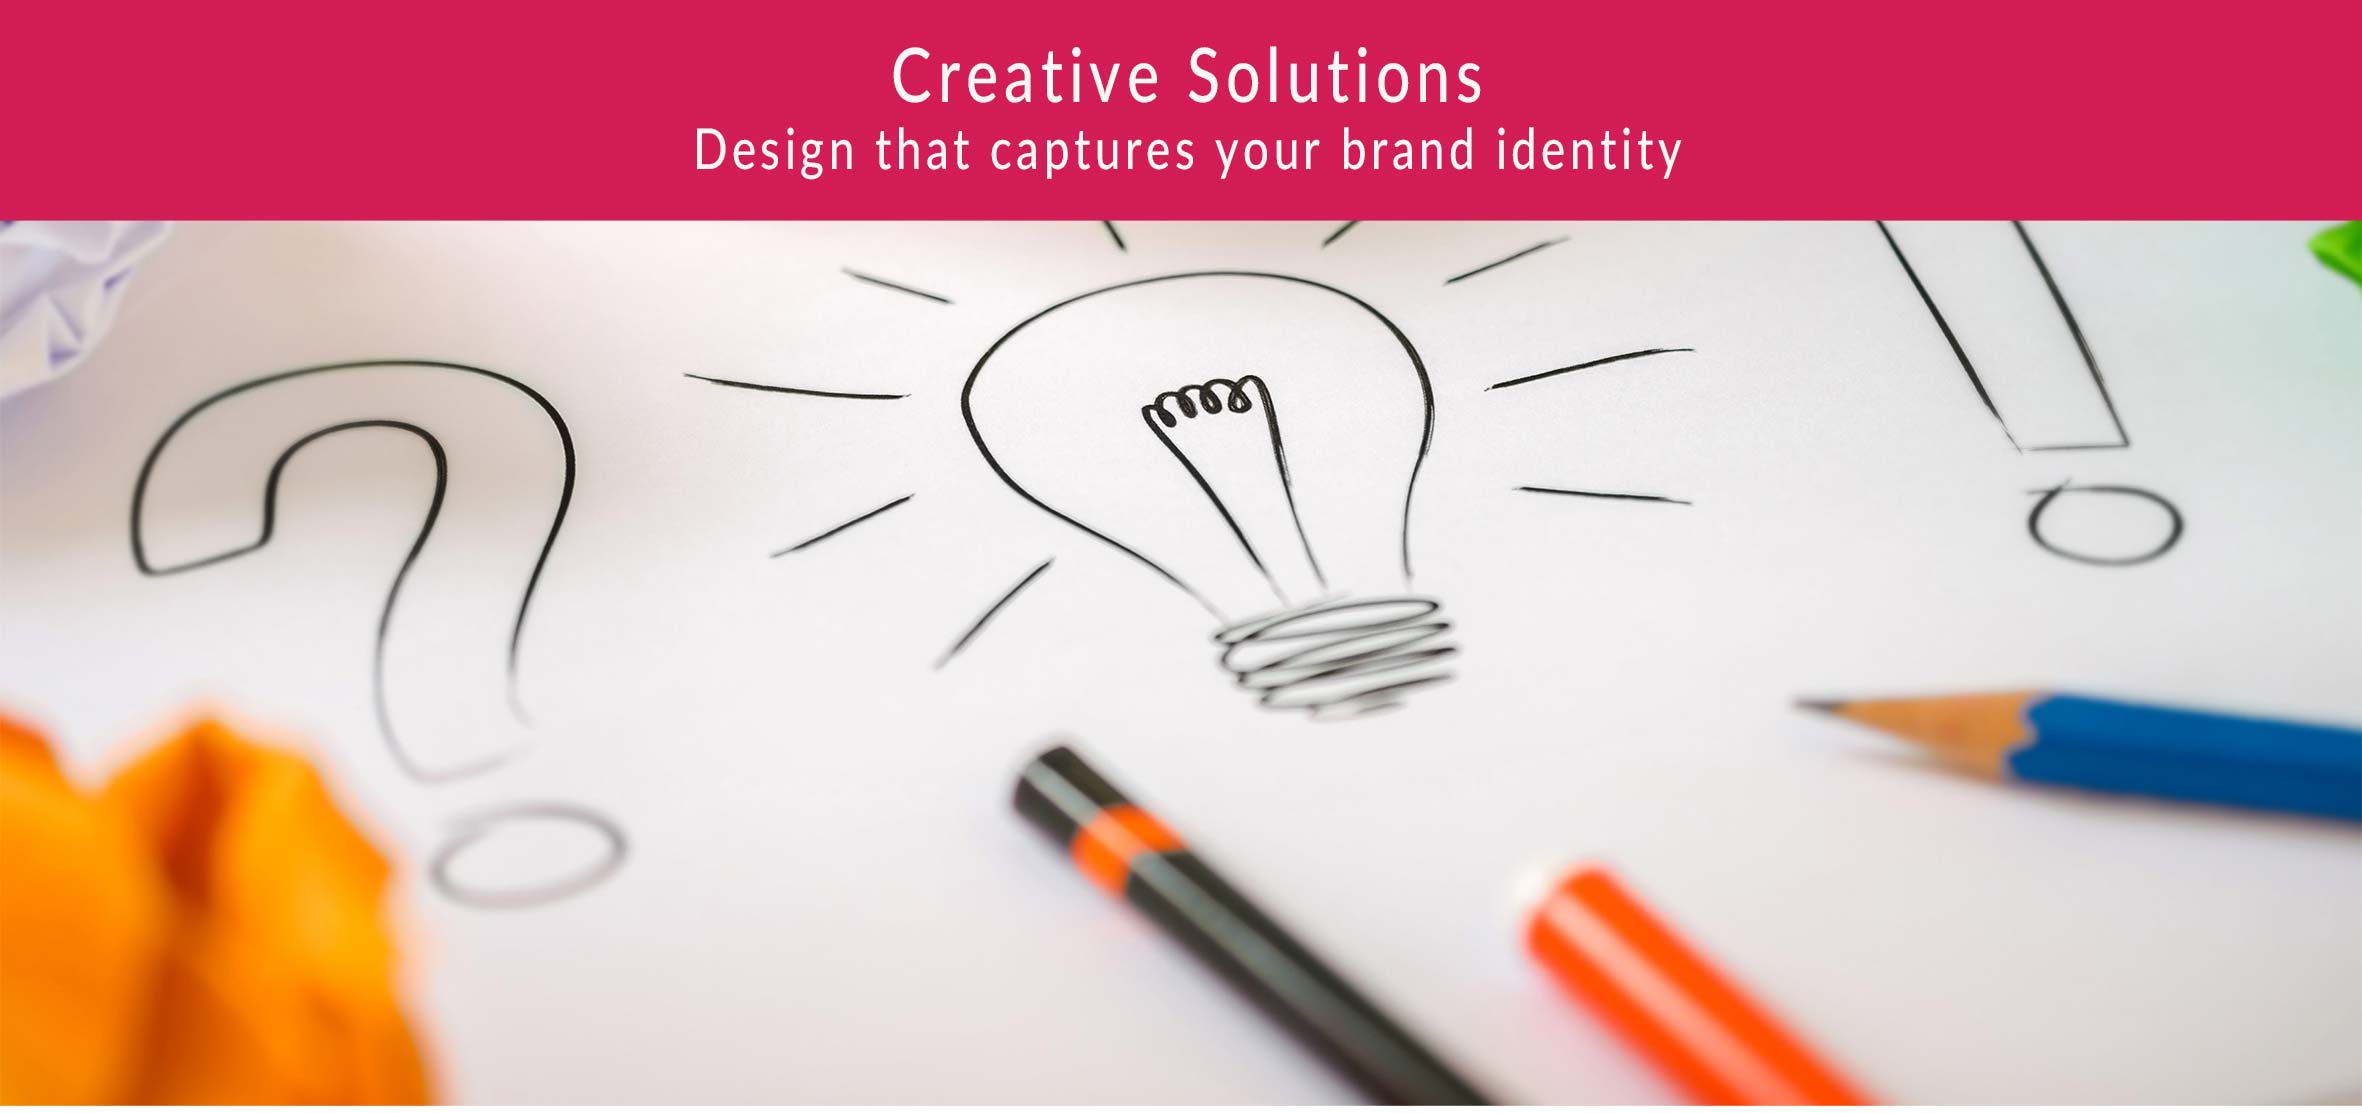 Design that captures your brand identity